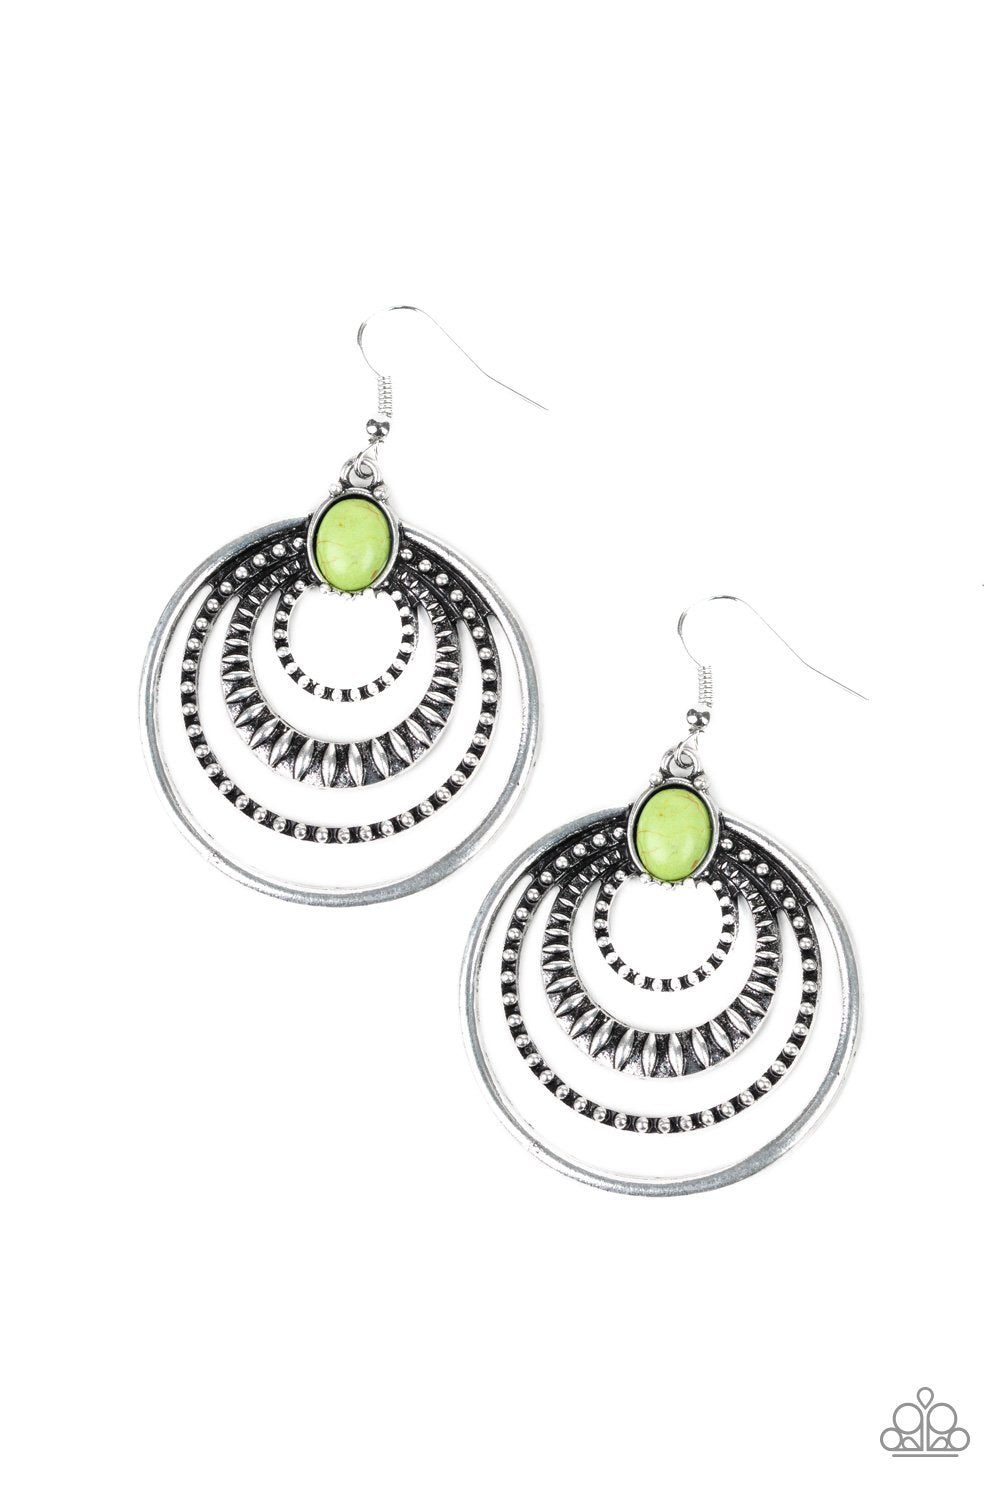 Southern Sol Green Stone Earrings - Paparazzi Accessories-CarasShop.com - $5 Jewelry by Cara Jewels